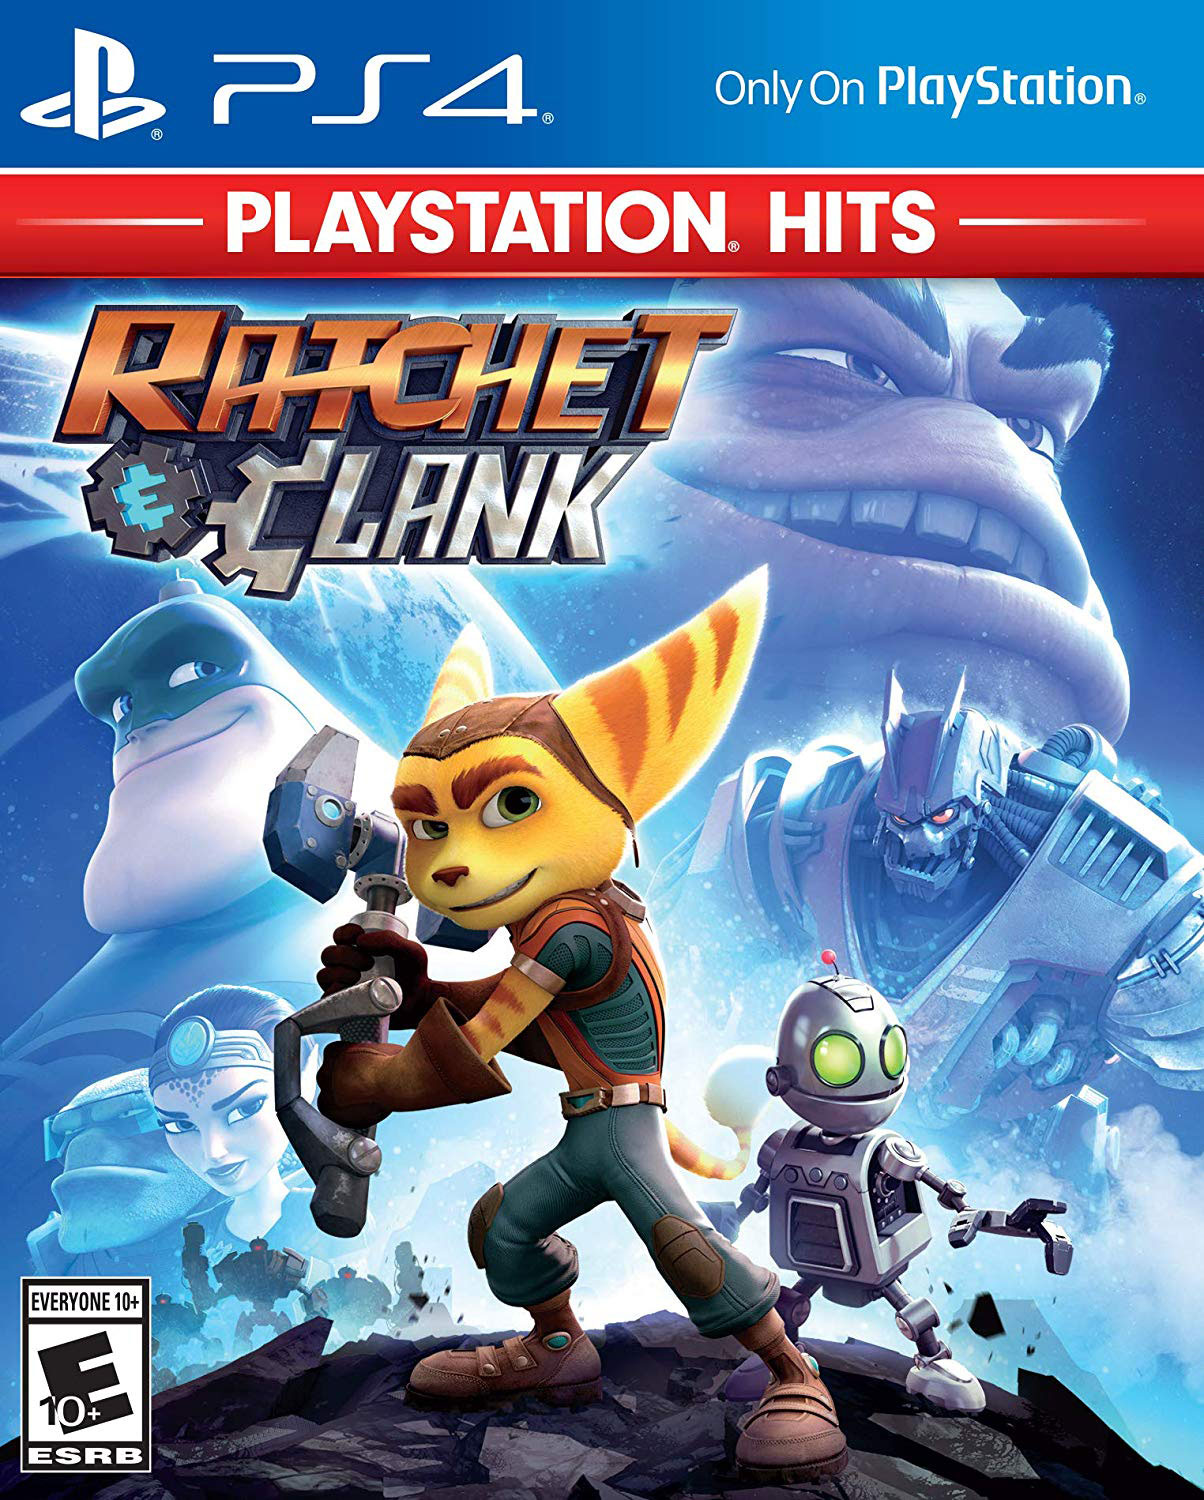 Ratchet-and-Clank-PS4-Cover-Large.jpg